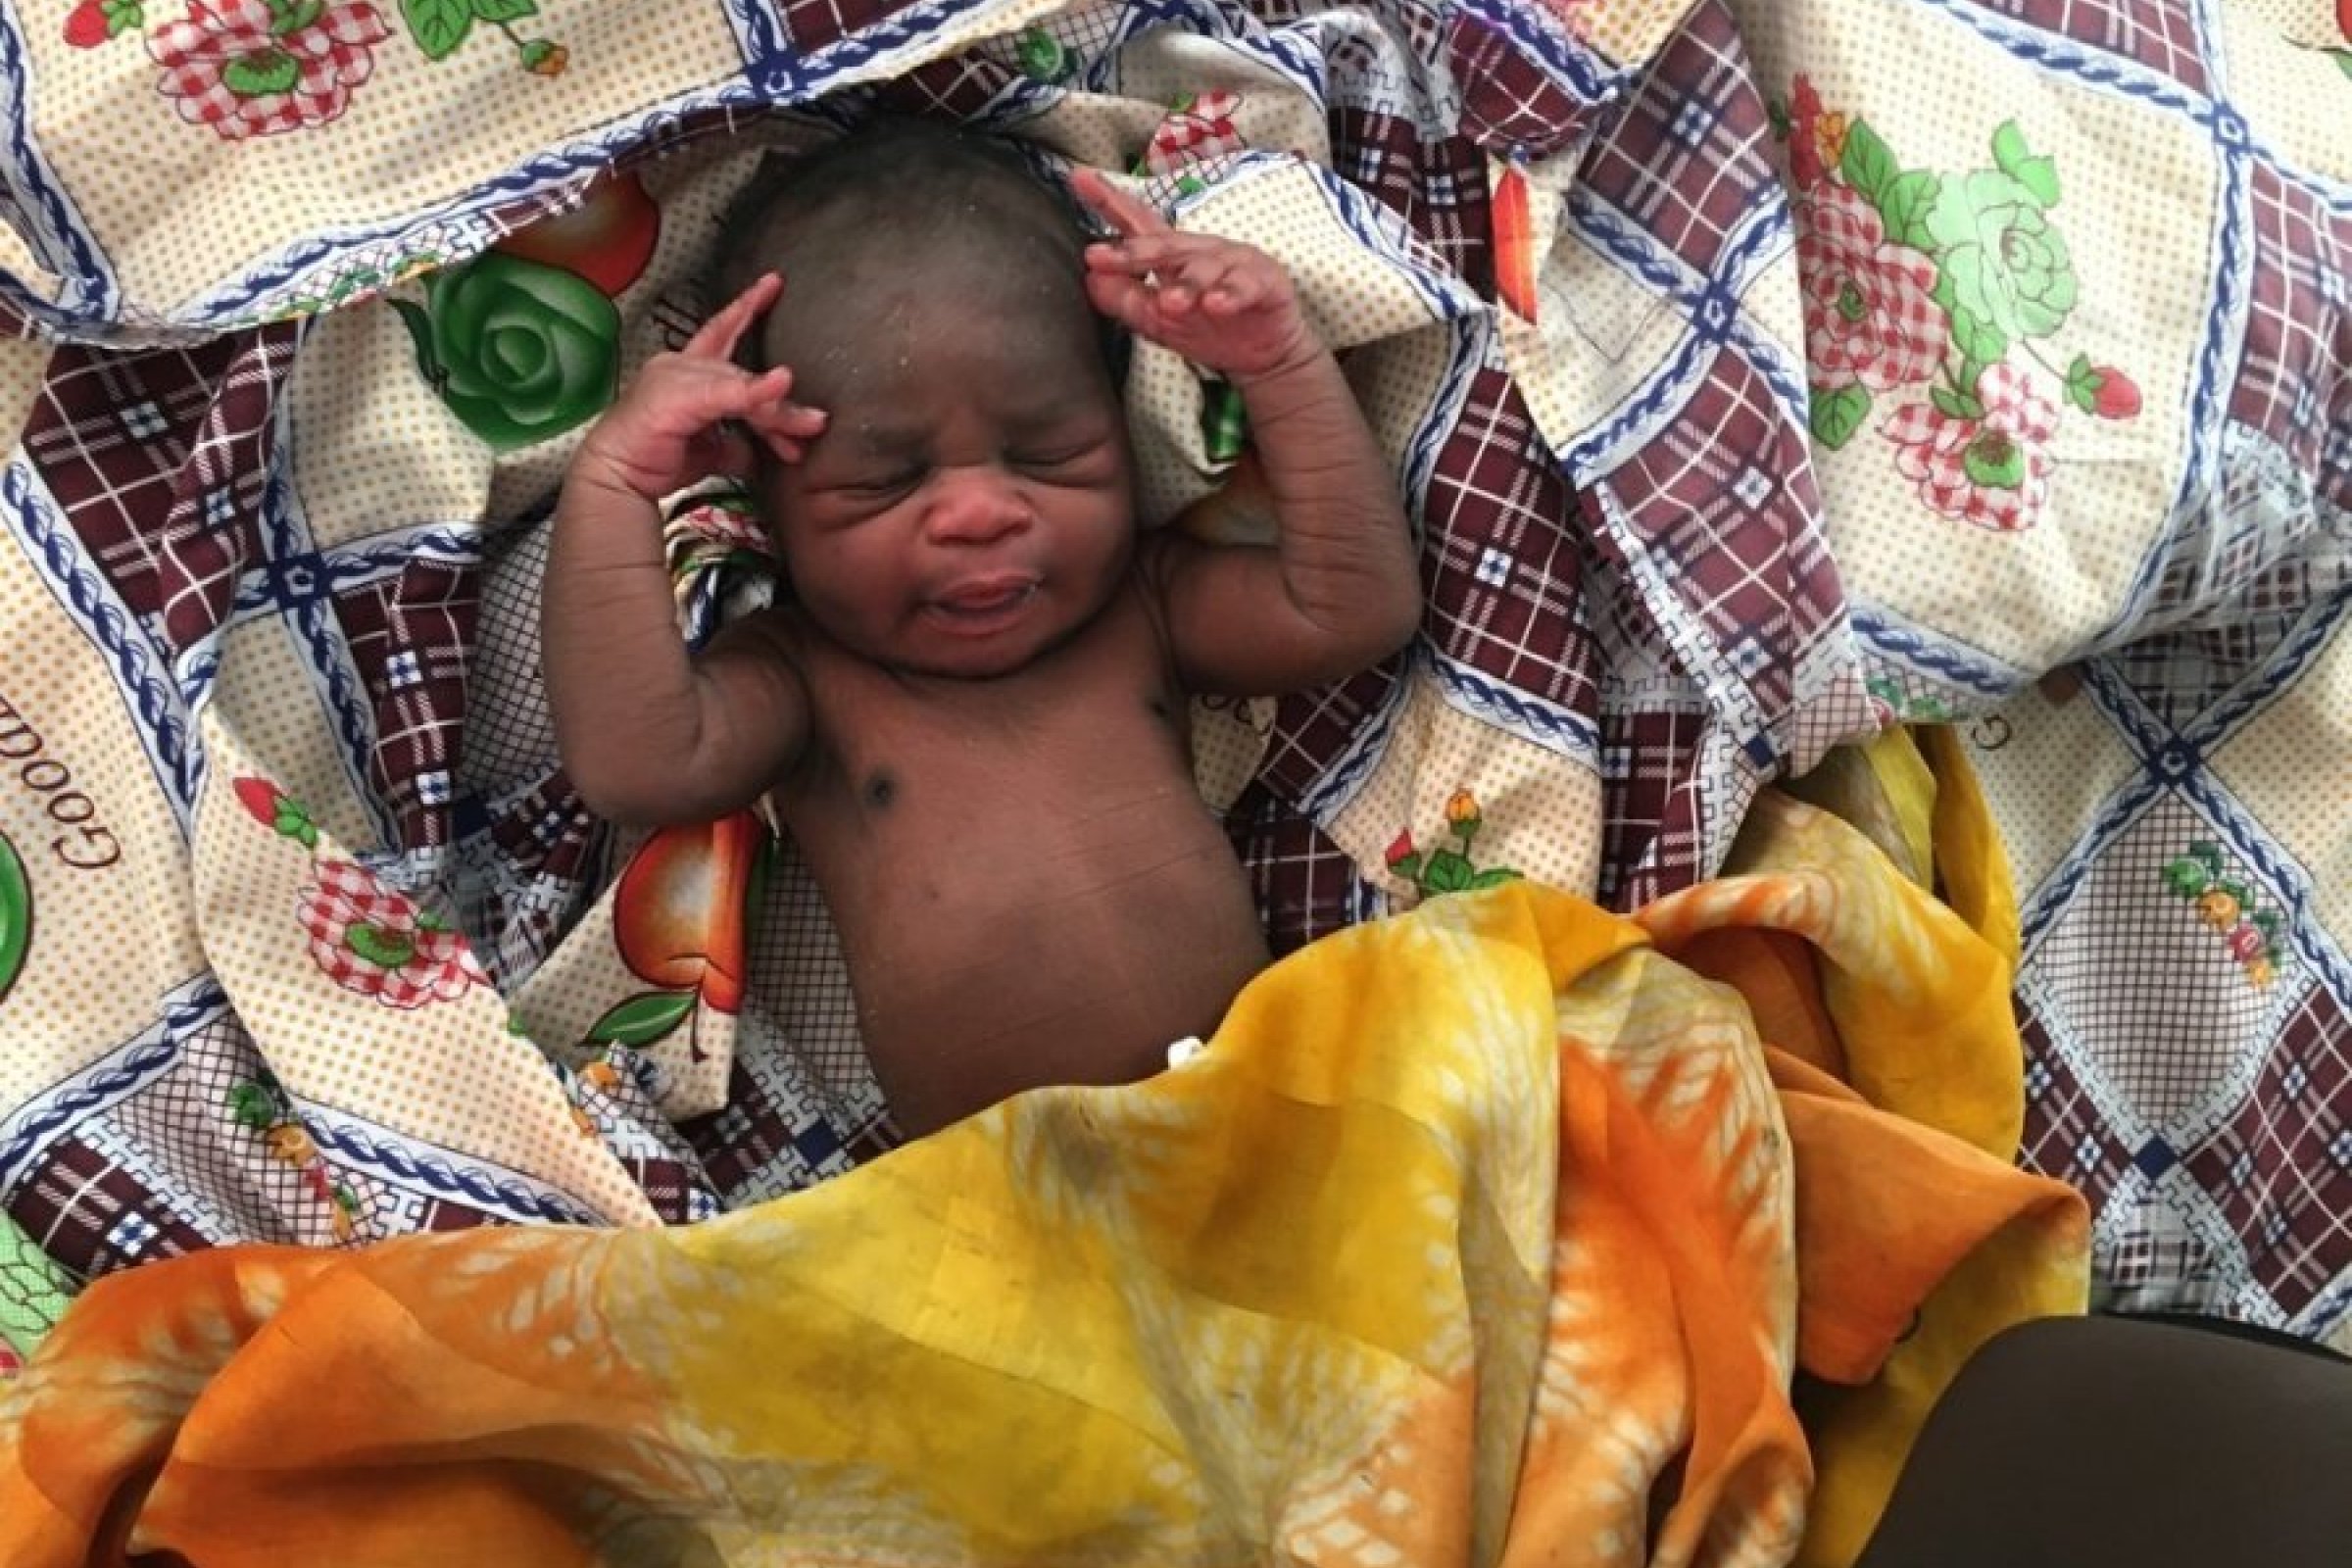 This little boy was born in the MSF hospital in Bentiu, South Sudan